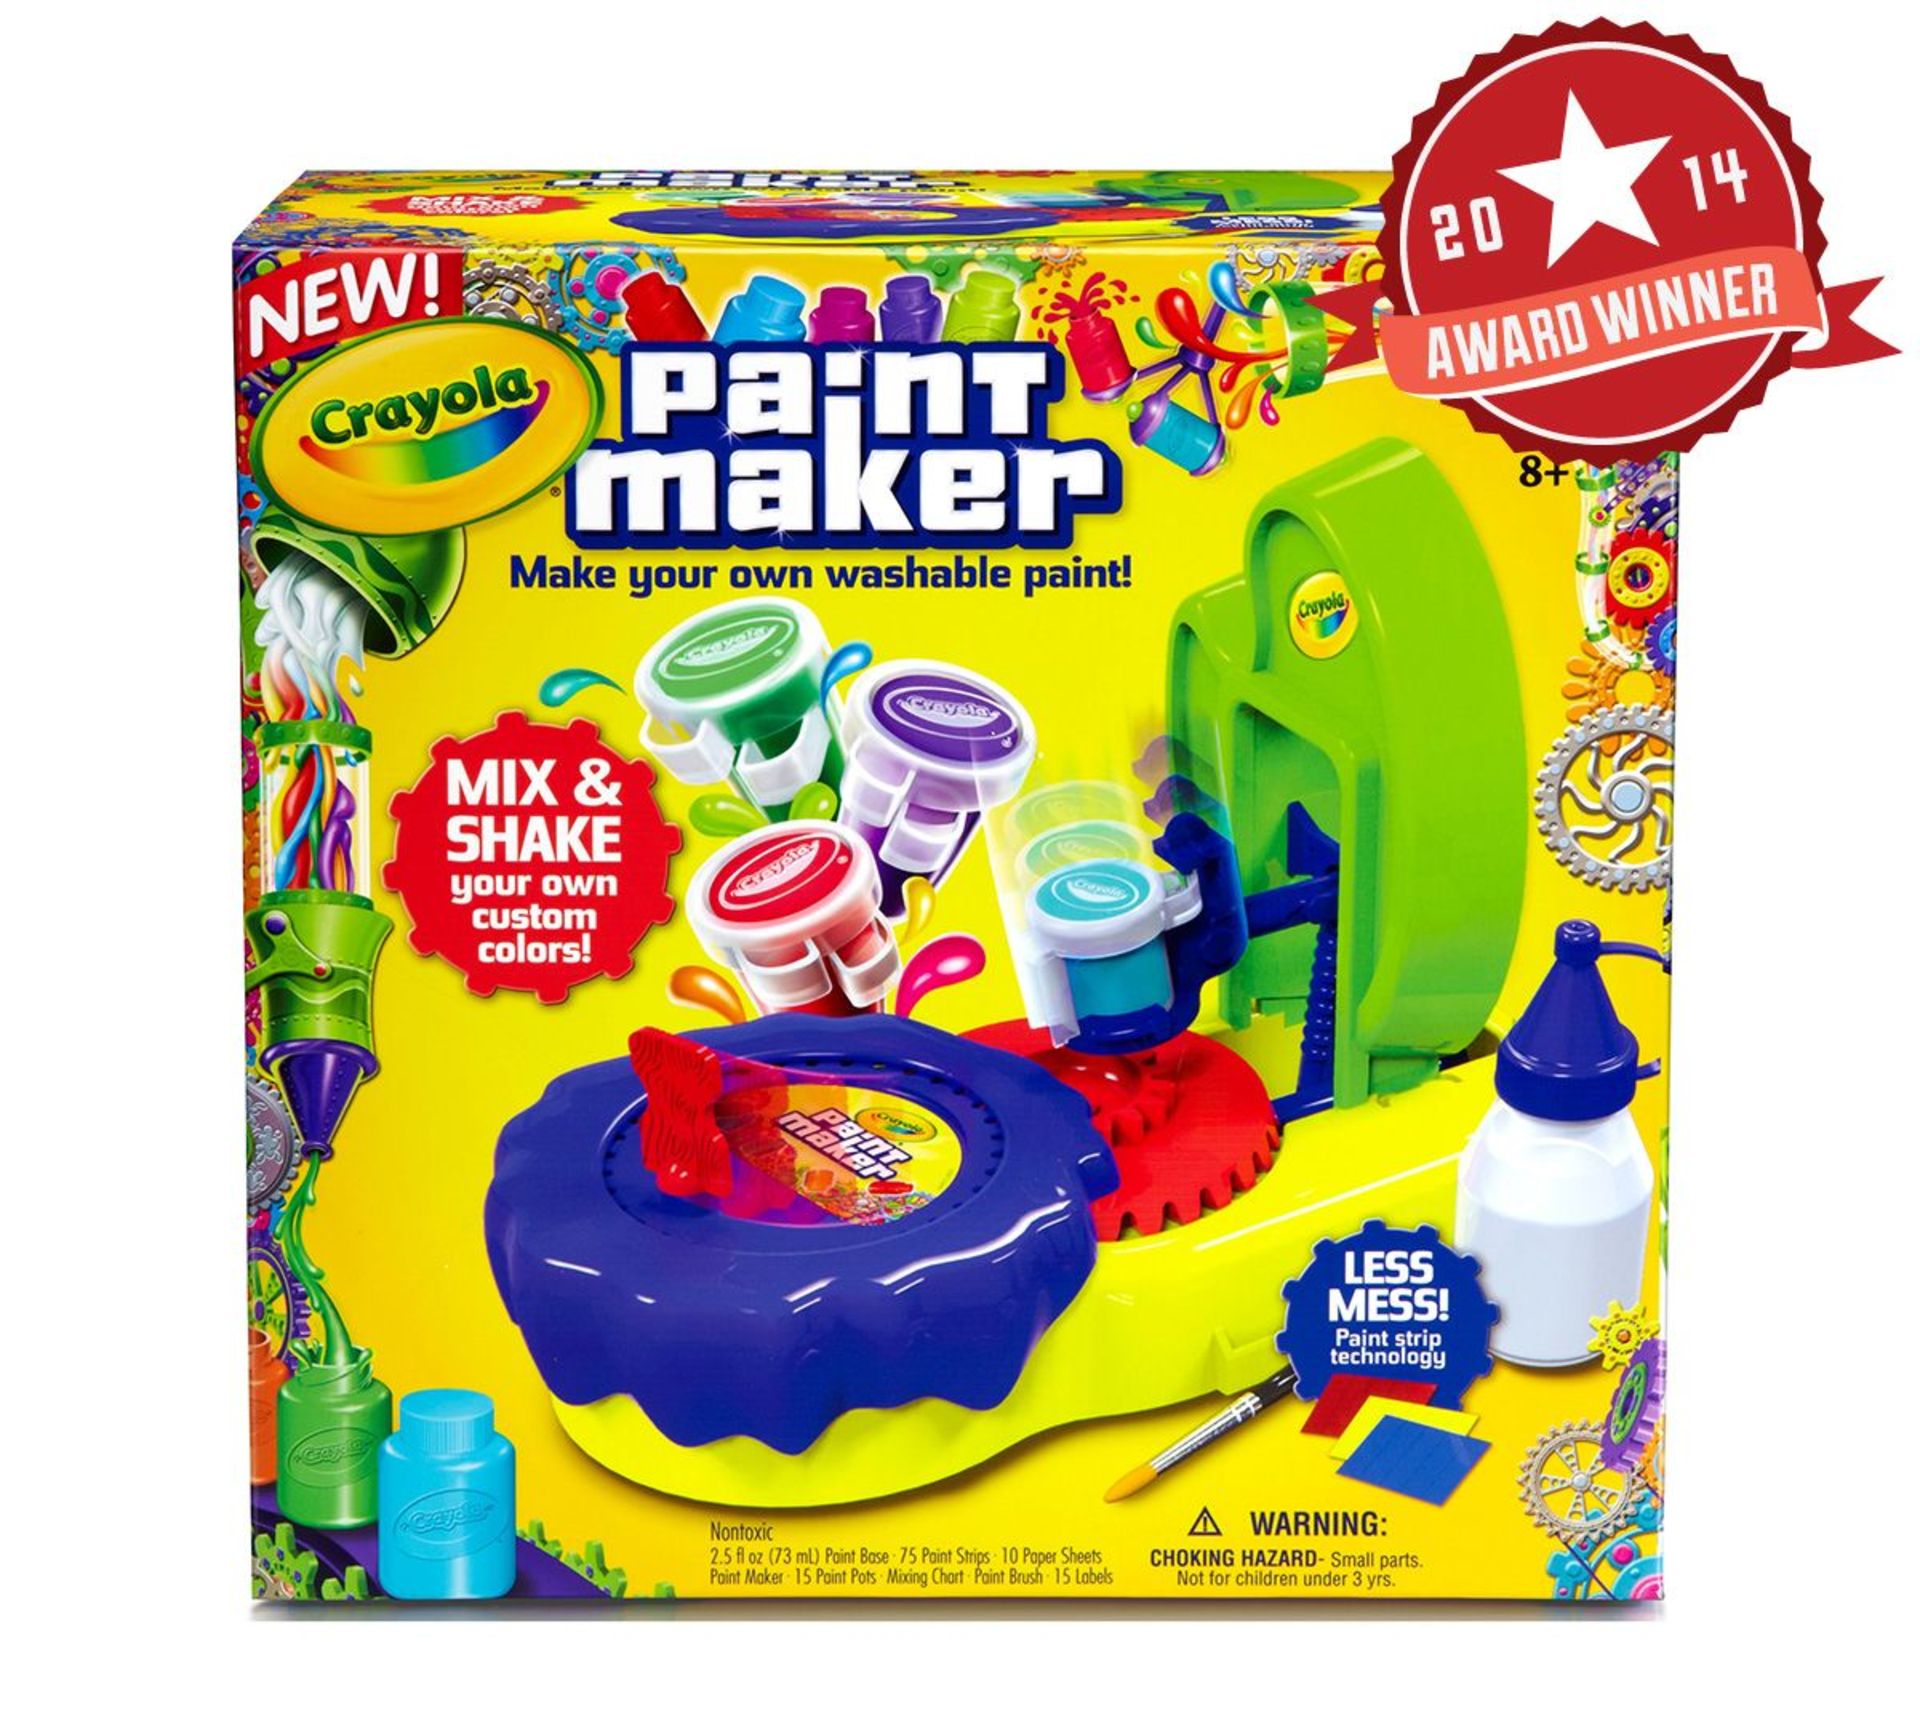 V *TRADE QTY* Brand New Crayola Paint Maker Kit for Washable Paint X 4 YOUR BID PRICE TO BE